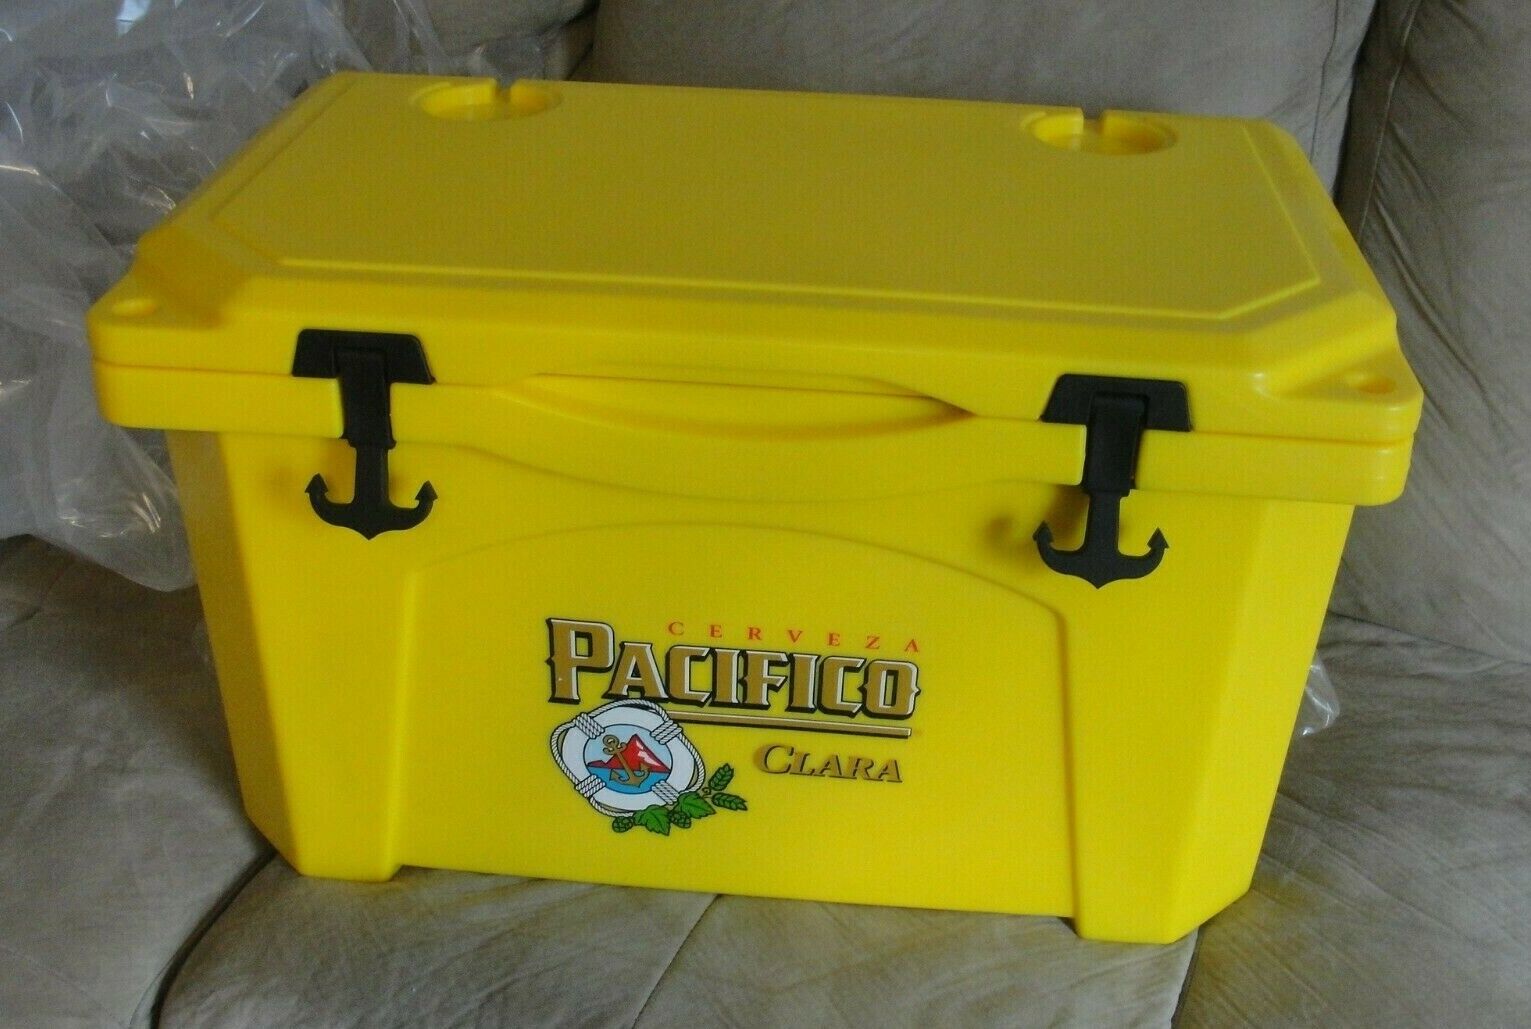 GRIZZLY BEER BEAR PROOF COOLER 40 QT PACIFICO CLARA YELLOW BRAND NEW IN BOX USA